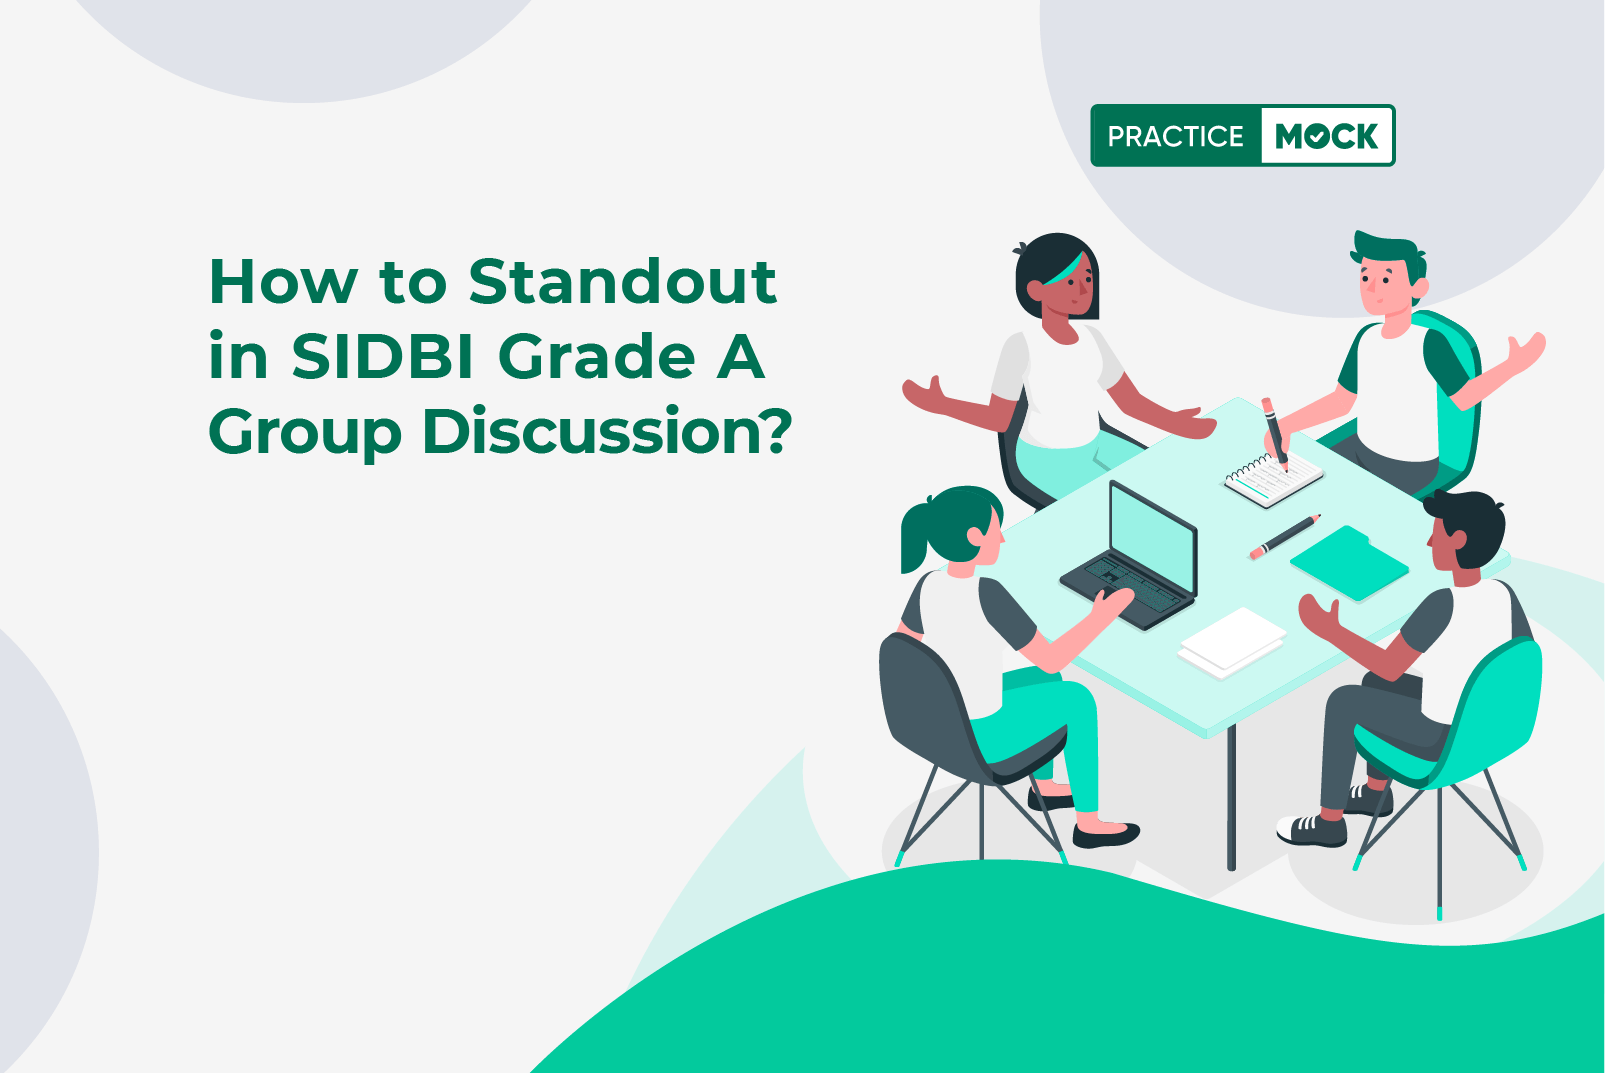 How to Standout in SIDBI Grade A Group Discussion